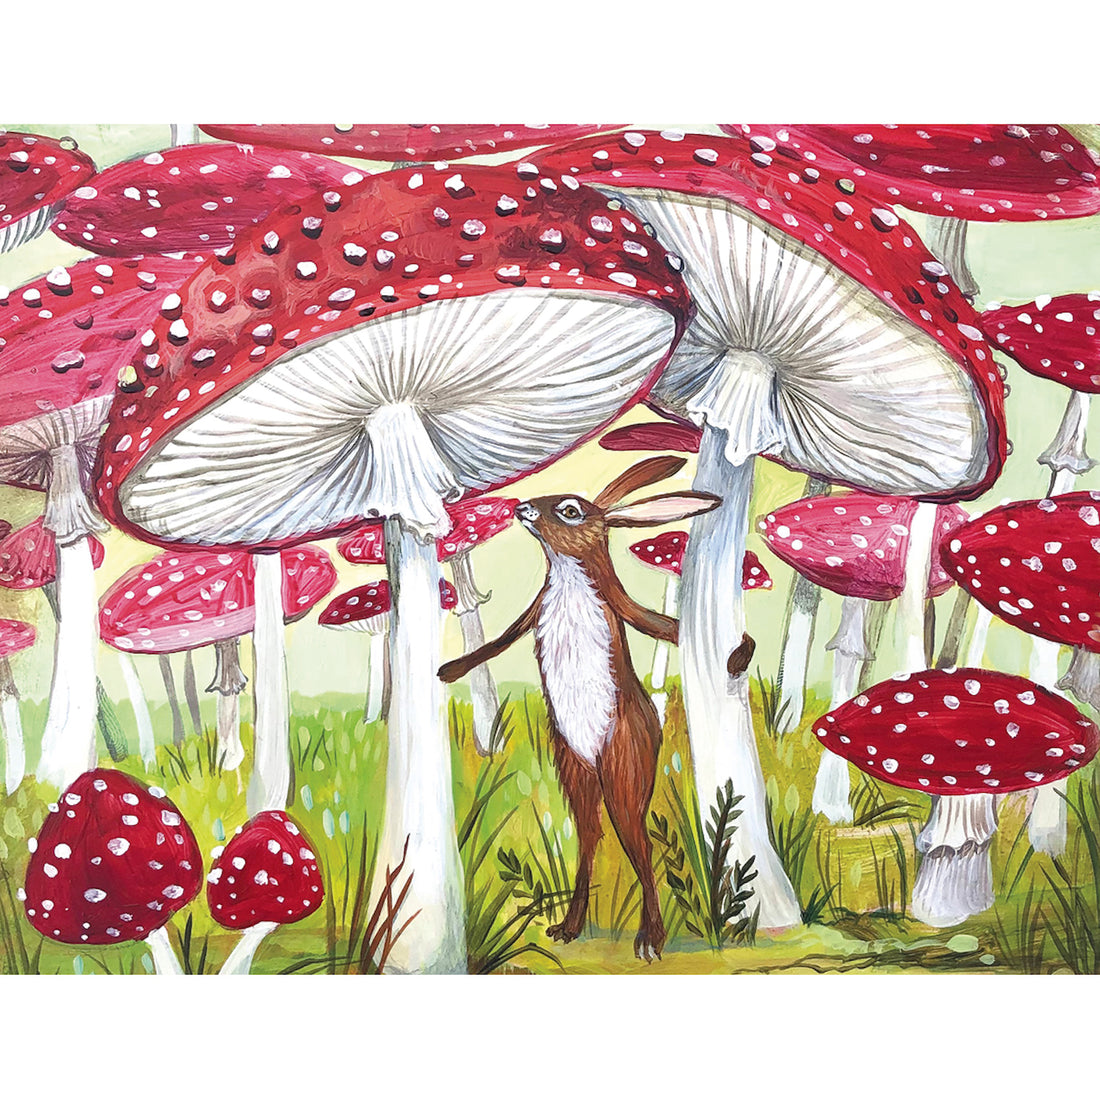 A whimsical illustration of a brown and white rabbit standing among a dense forest of gigantic red and white mushrooms in green grass.